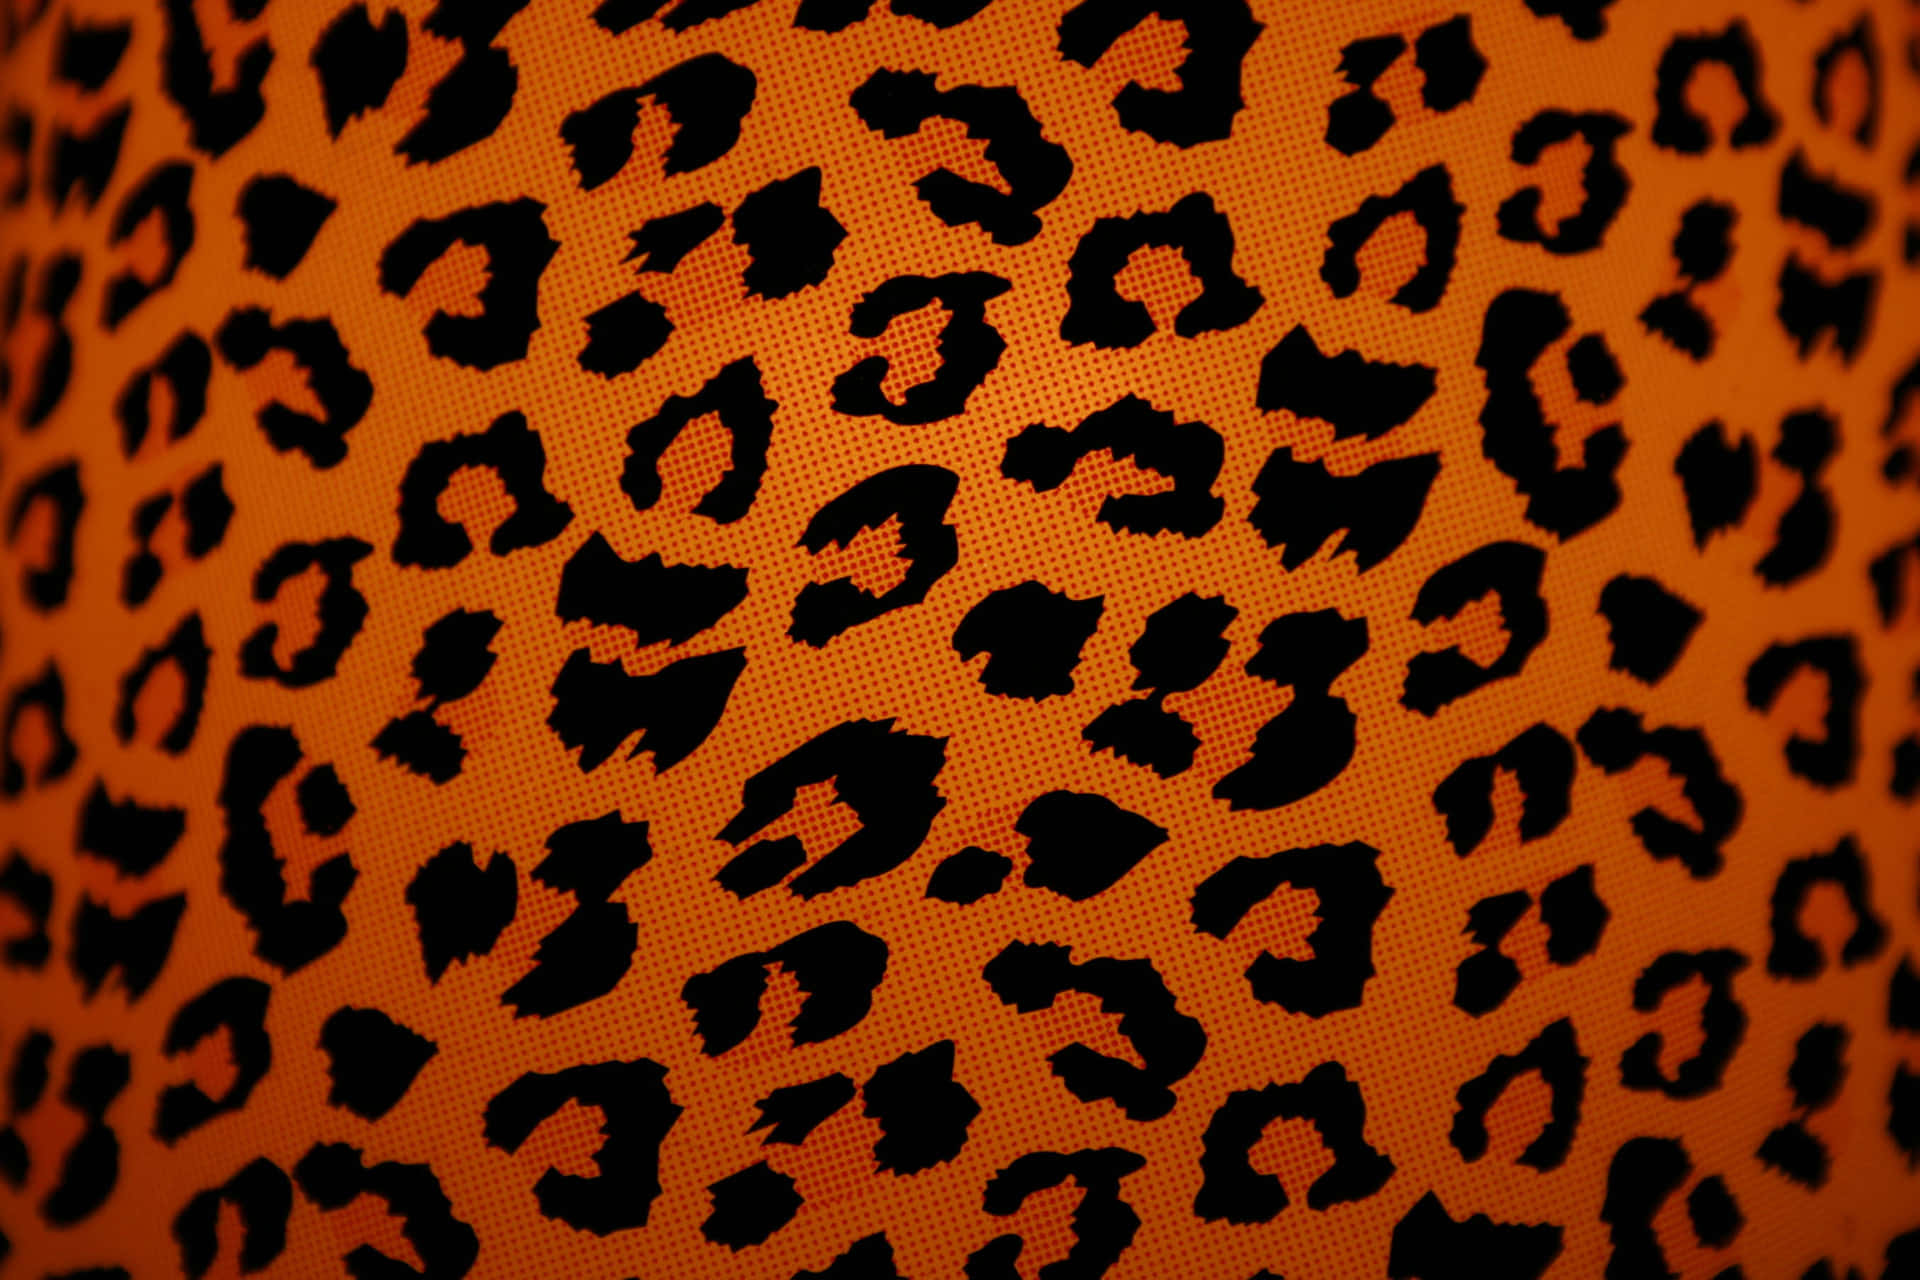 Fur and Animal Print Backgrounds and Wallpapers  Leopard print wallpaper,  Animal print wallpaper, Animal print background